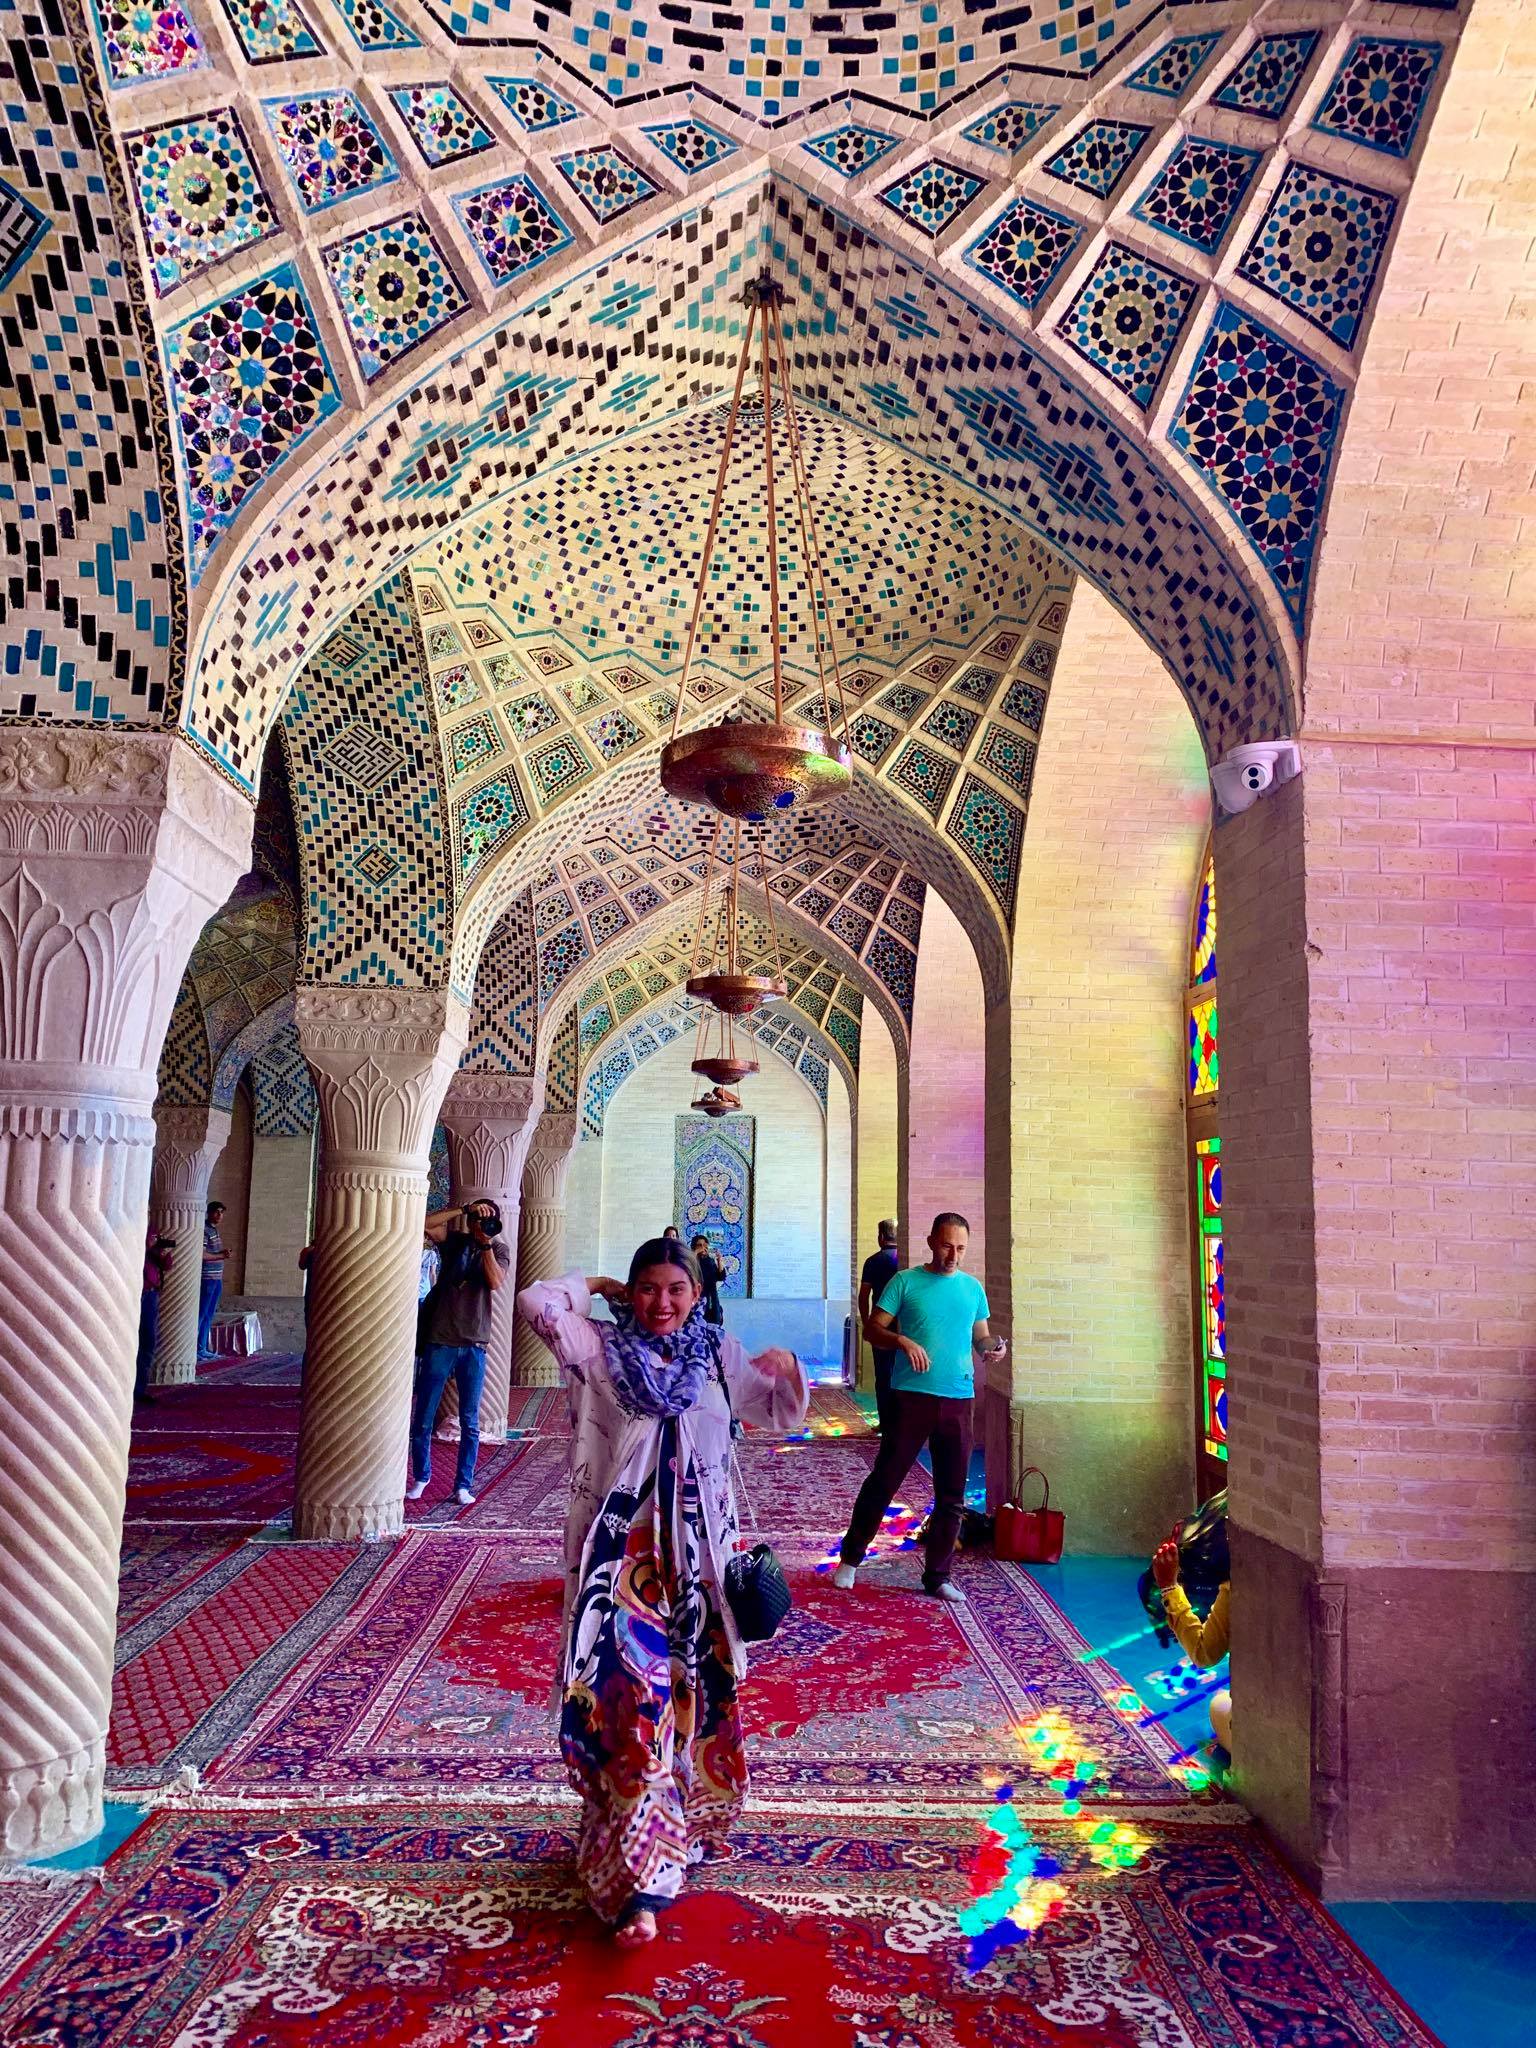 Kach Solo Travels in 2019 Full day tour of Shiraz47.jpg